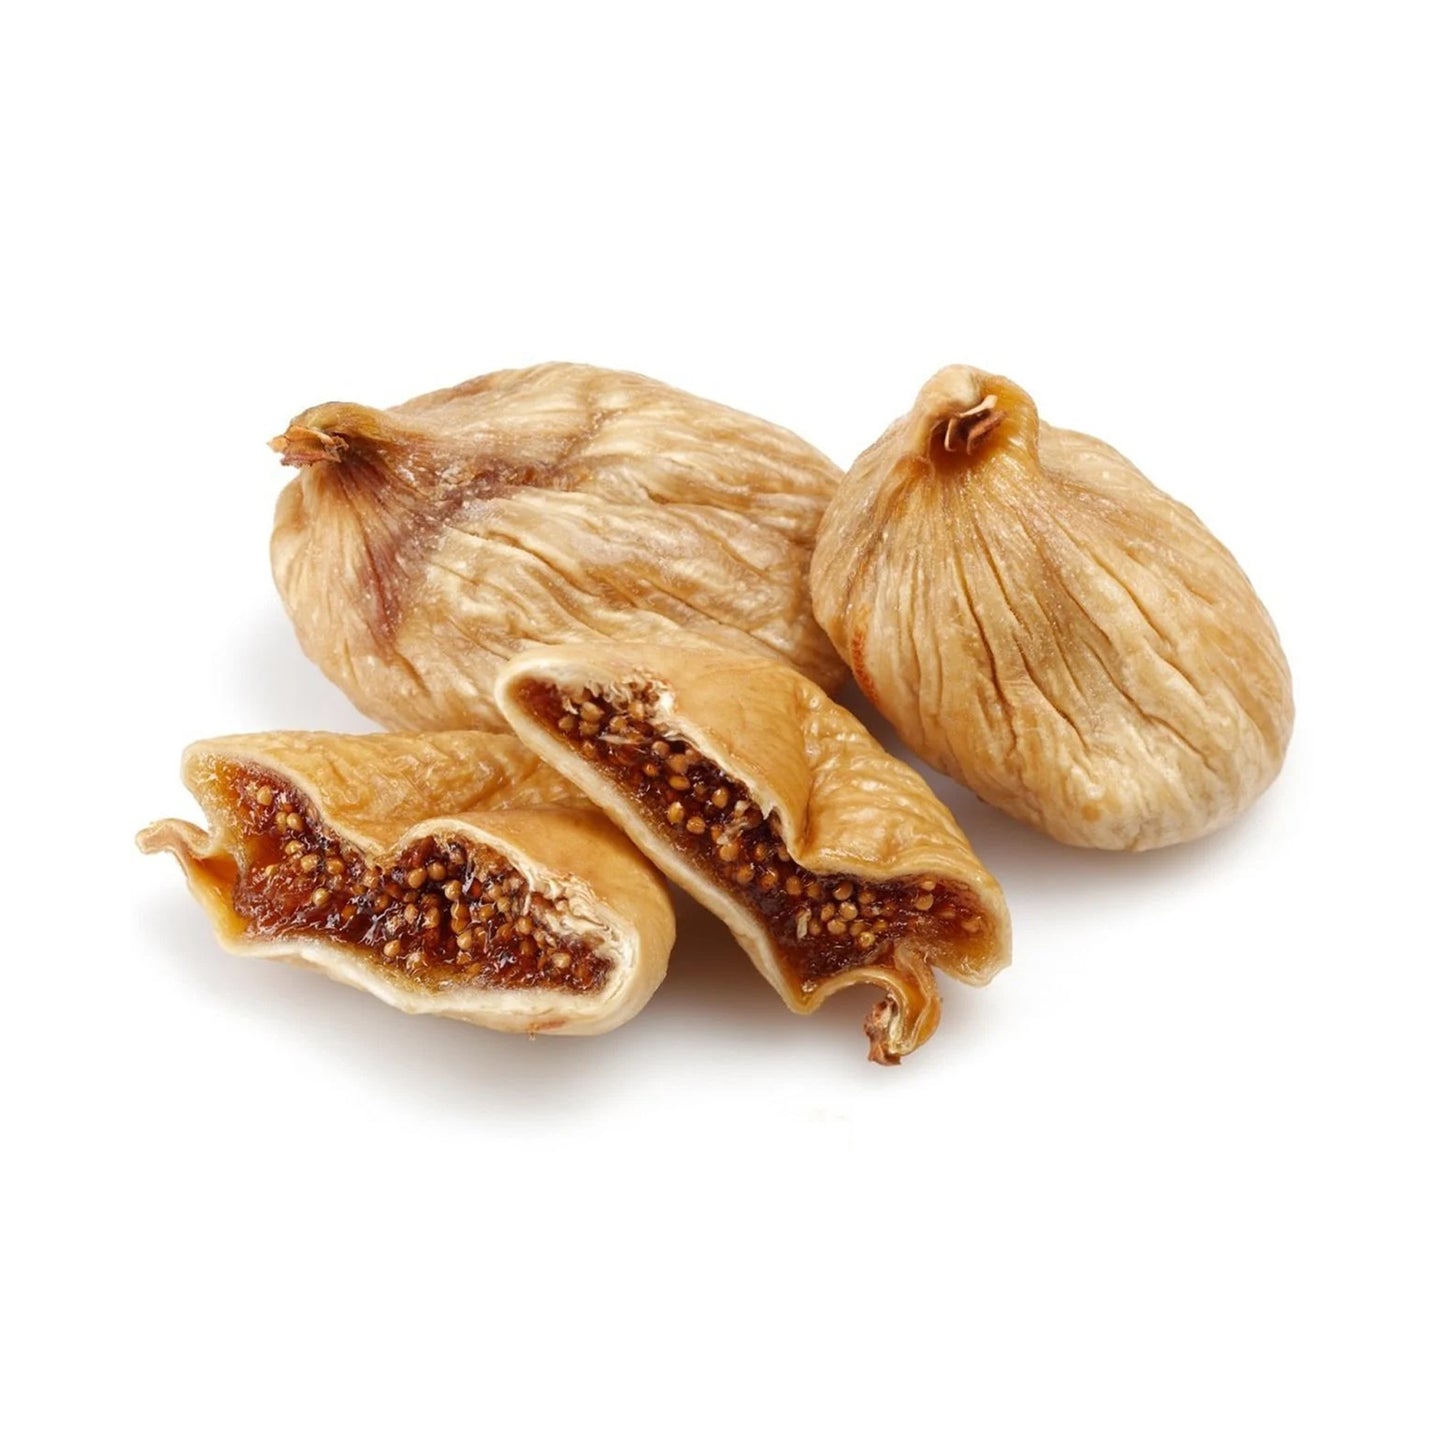 Organic Dried Fig - 0.22 lb: Sweet and chewy, our organic dried figs are a delicious and healthy snack. Order now!